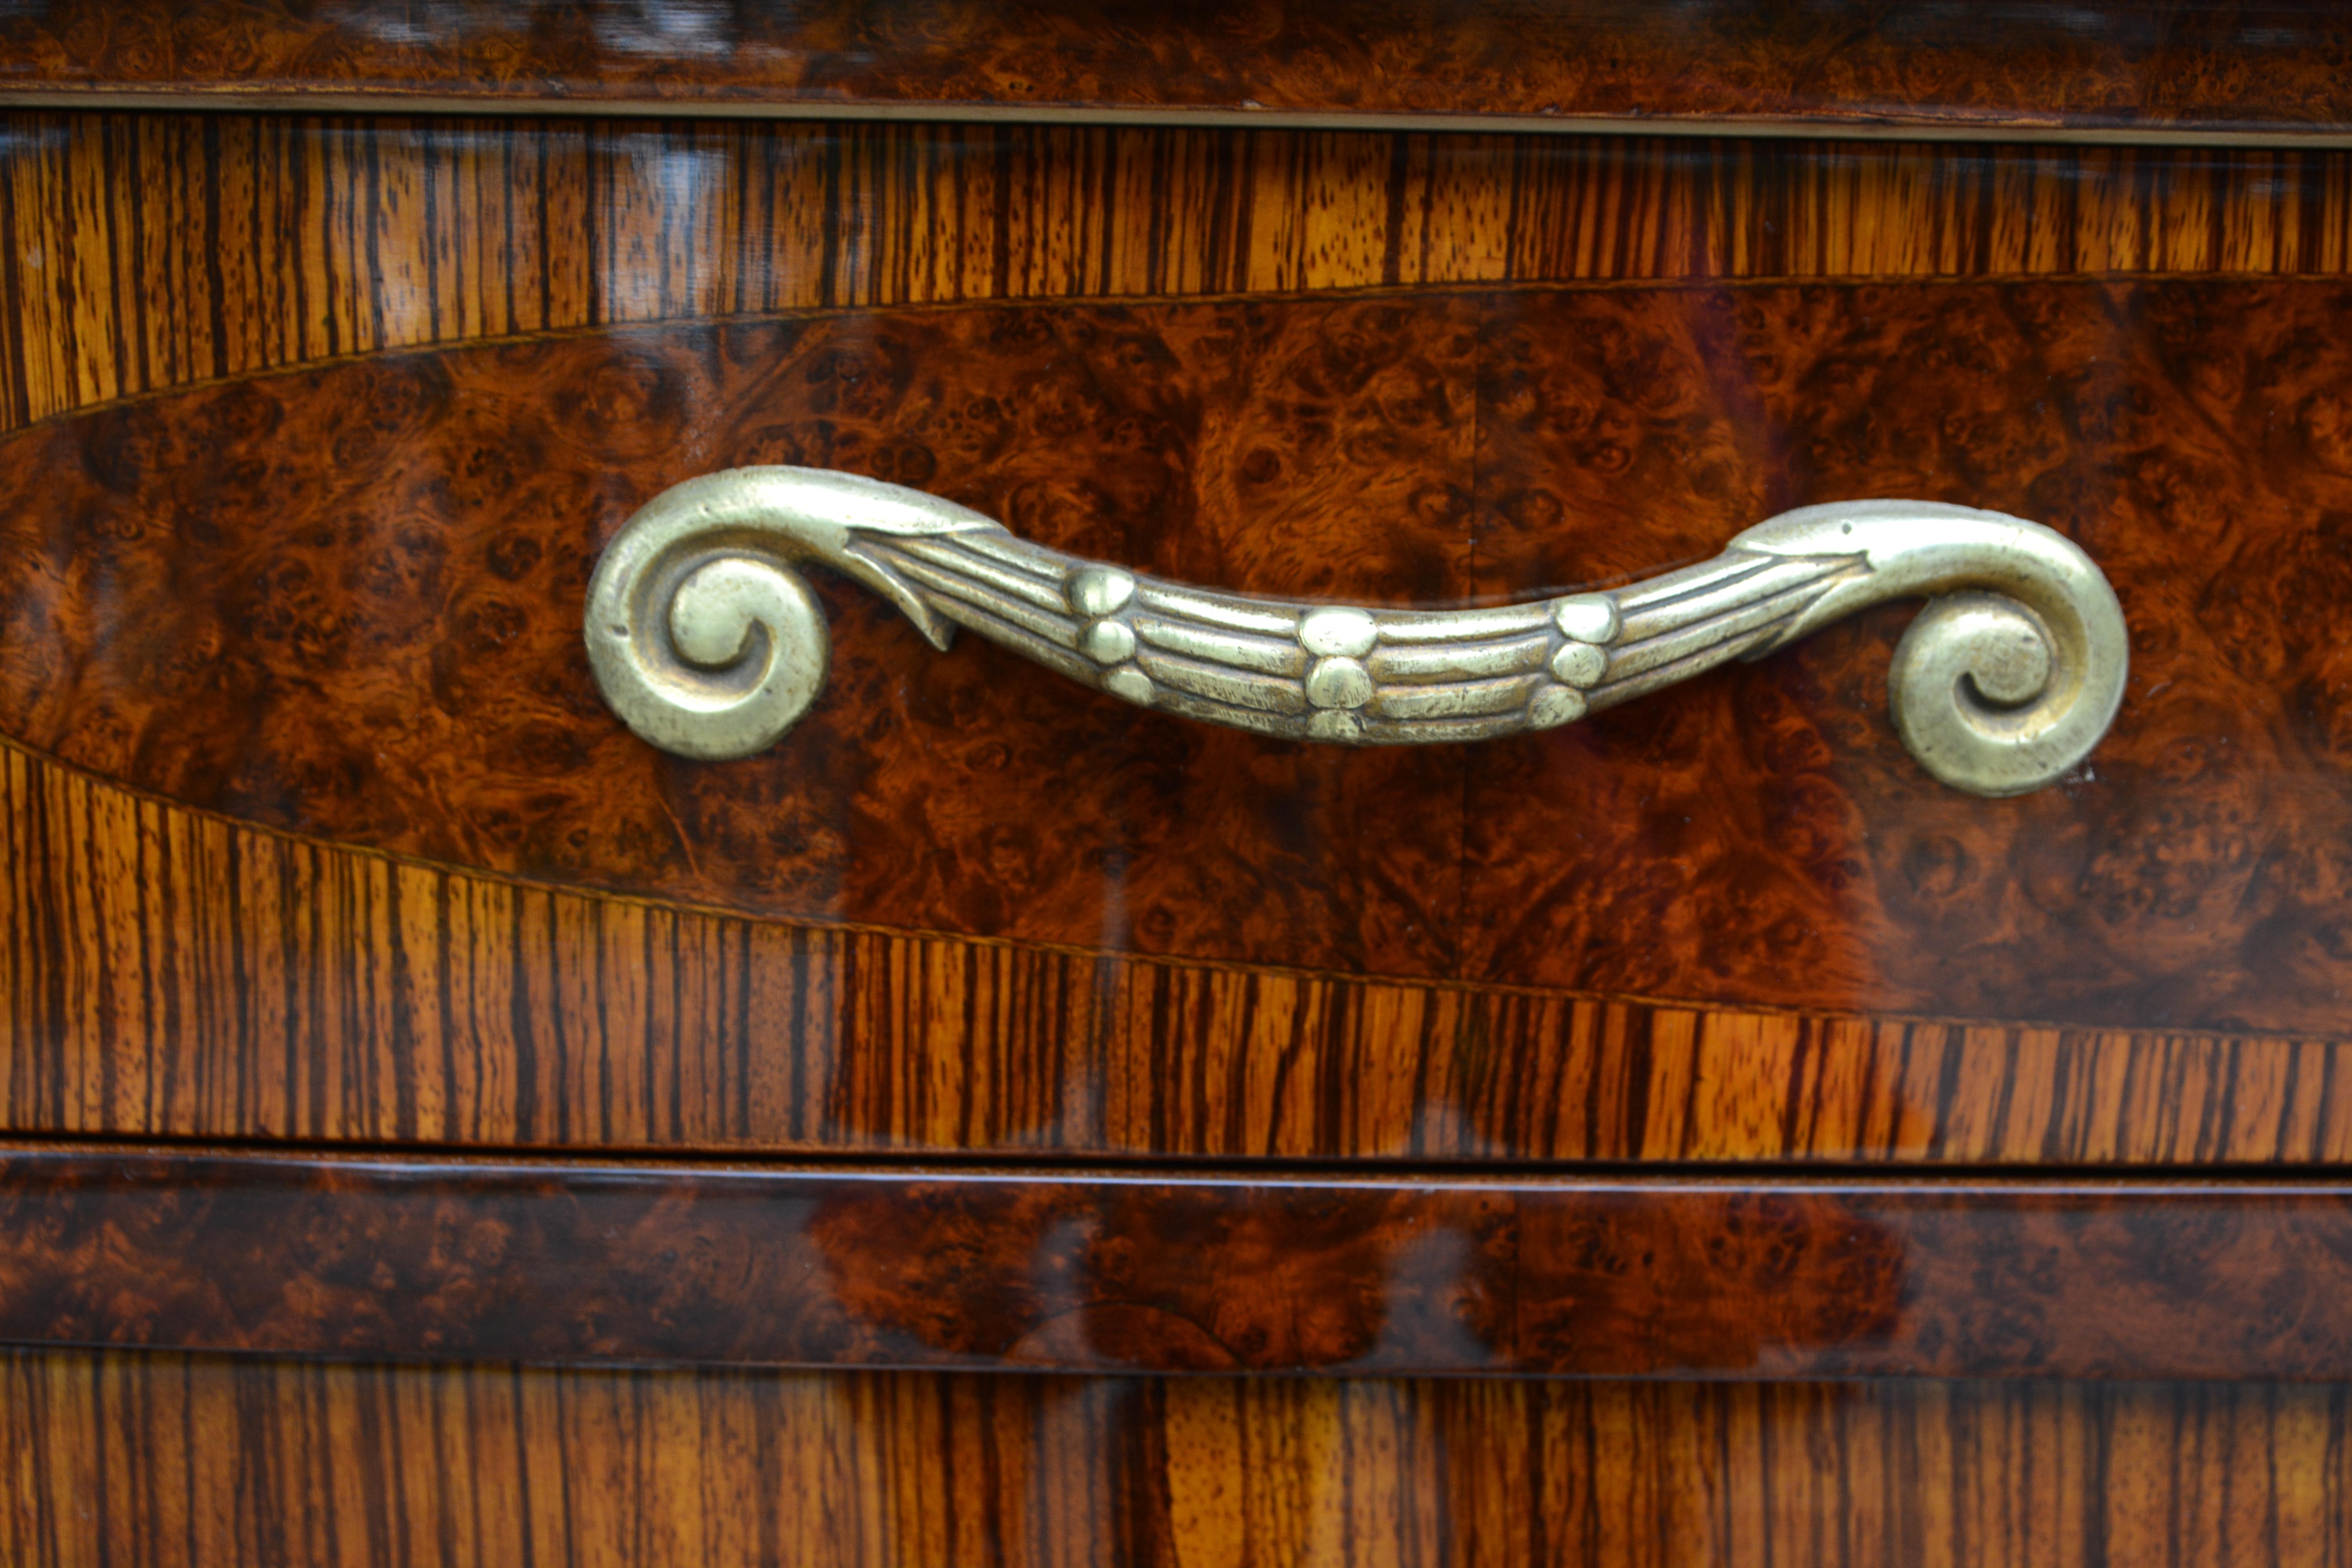 Attributed to Paul Follot - Art Deco sideboard, Paris, 1920s. Made of walnut, rosewood, and other fine woods.

Body with concave sides and fine floral inlays, a drawer and a facet cut glazed door. 

The French Art Nouveau and Art Deco designer